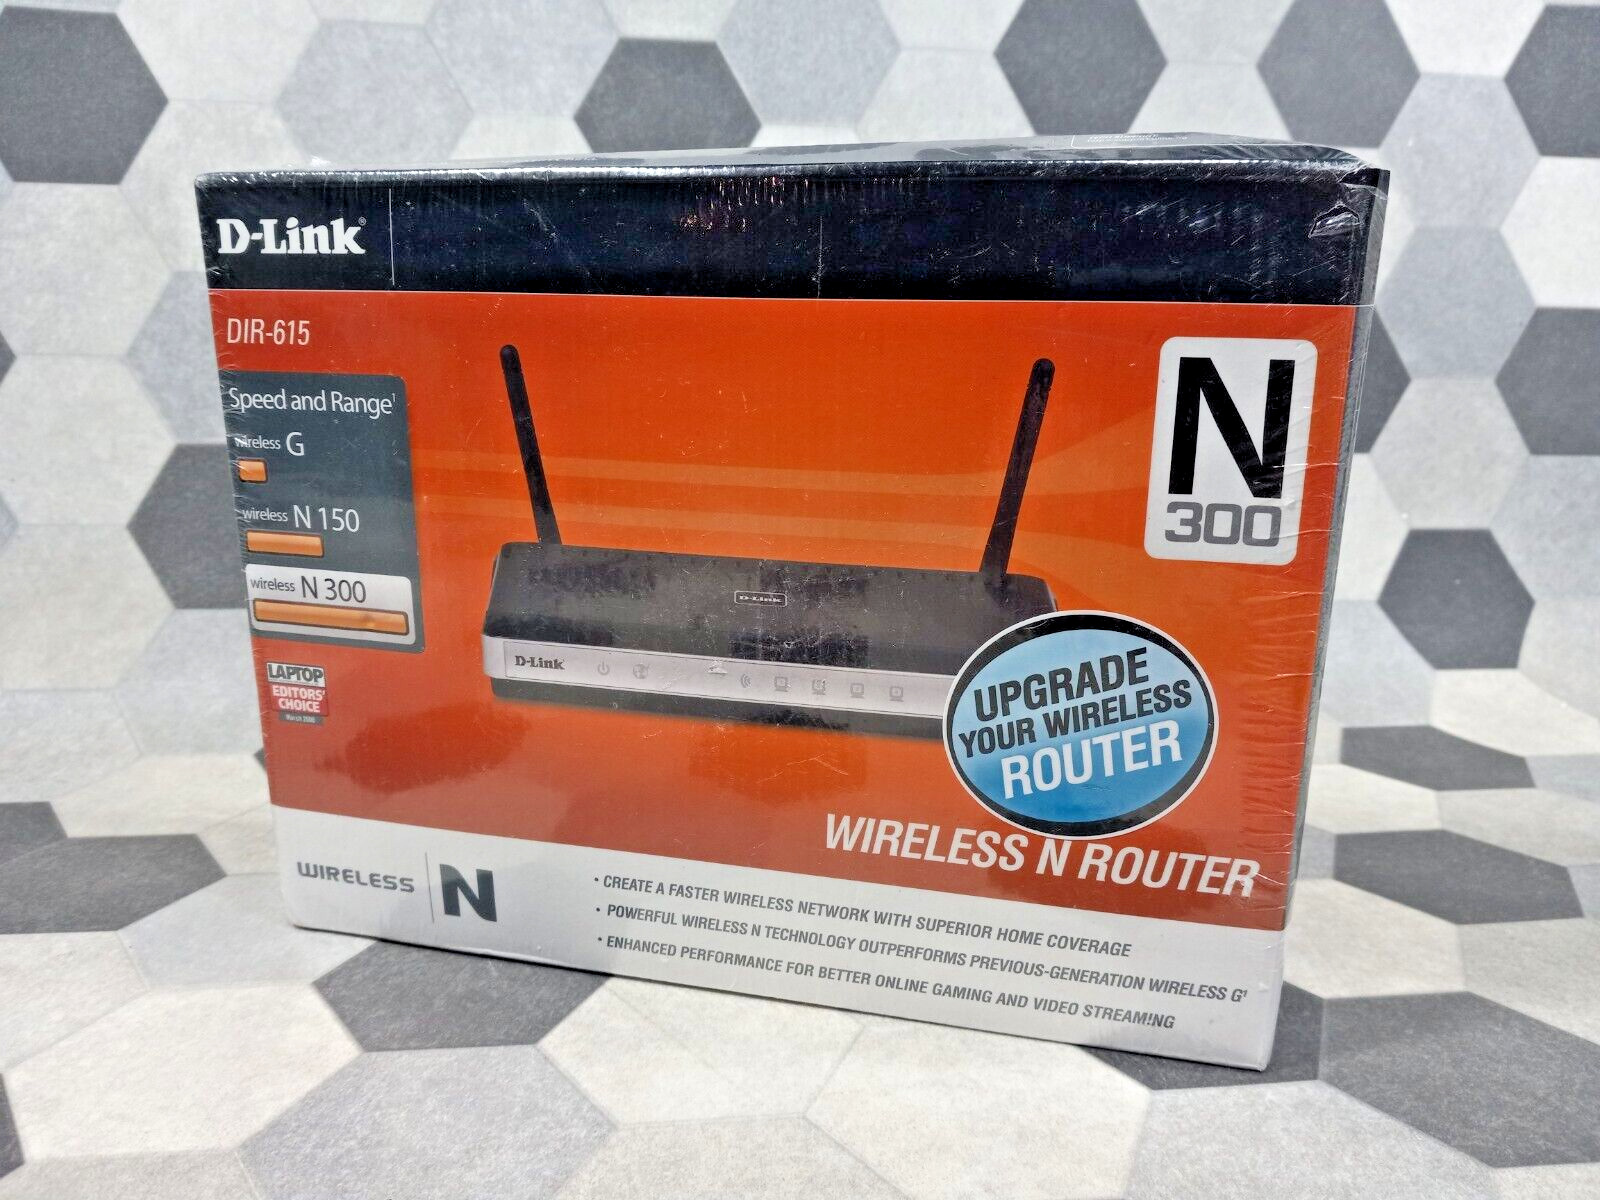 D-Link DIR-615 Wireless N Router N300 4 Ports 300 Mbps